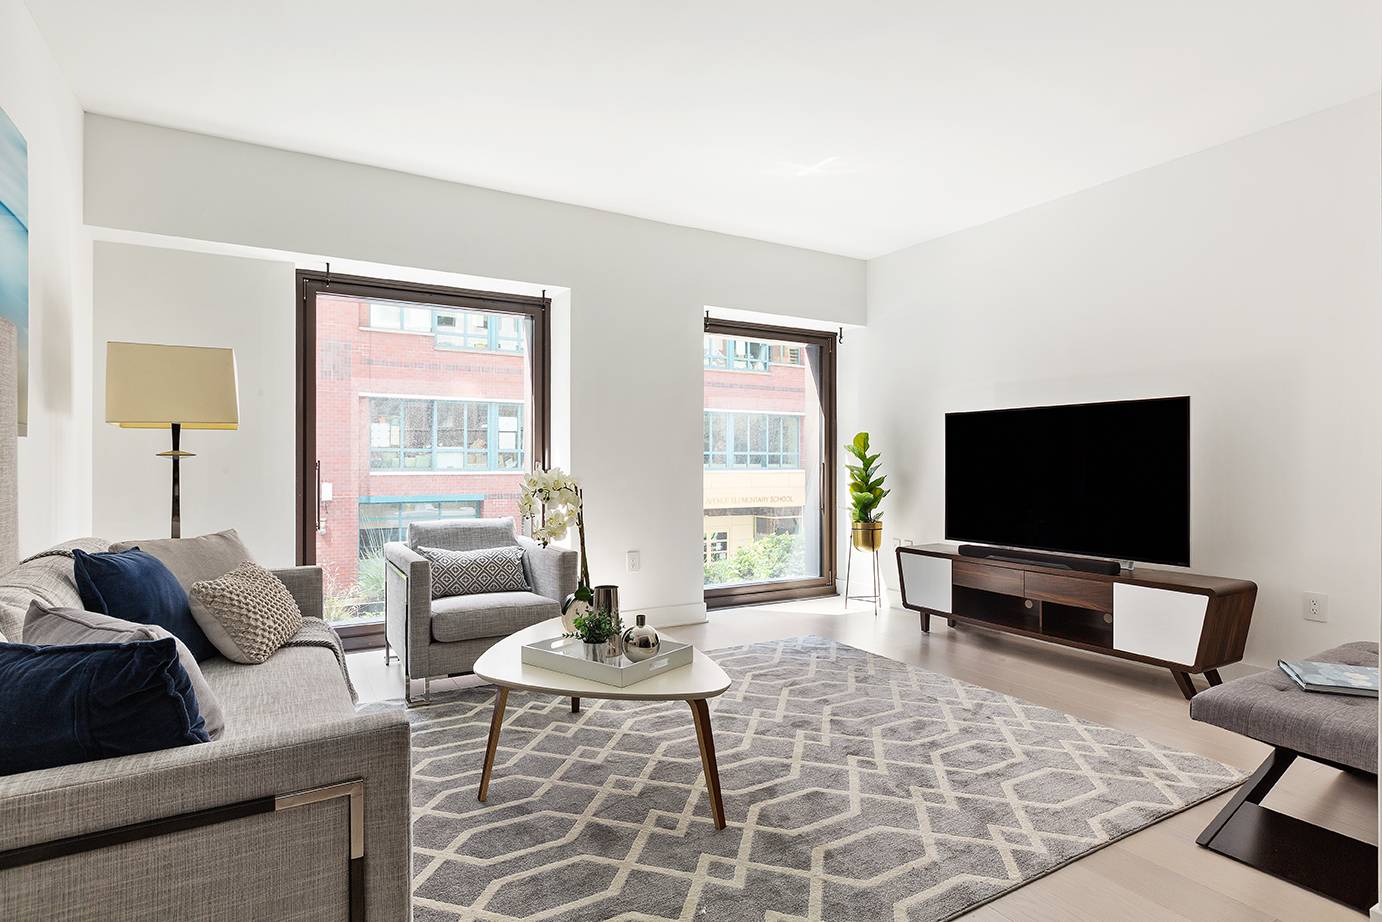 Inspired by the architecture of the Ladies Mile Historic District, Residence 203 at 55 West 17th fuses classic details with modern functionality.